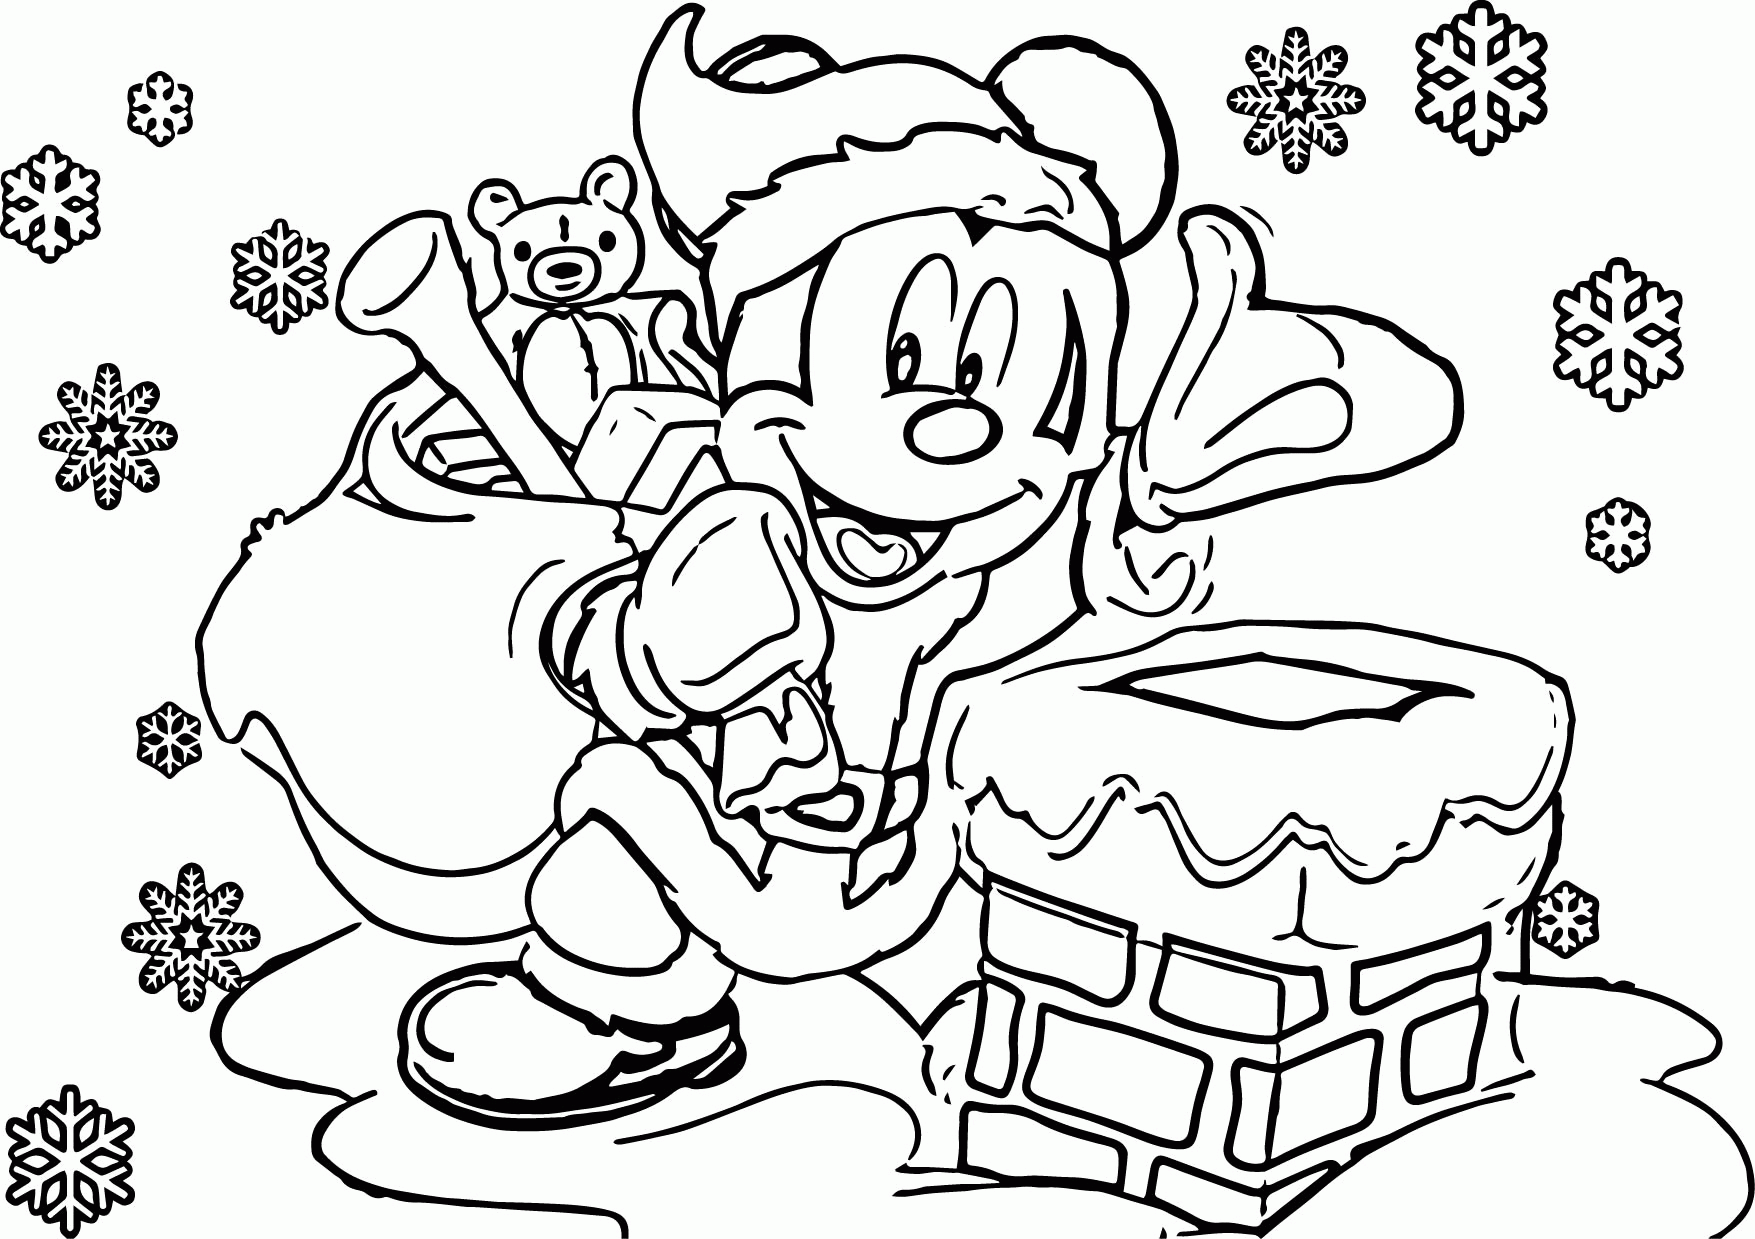 Christmas Coloring Pages Baseball - Coloring Pages For All Ages